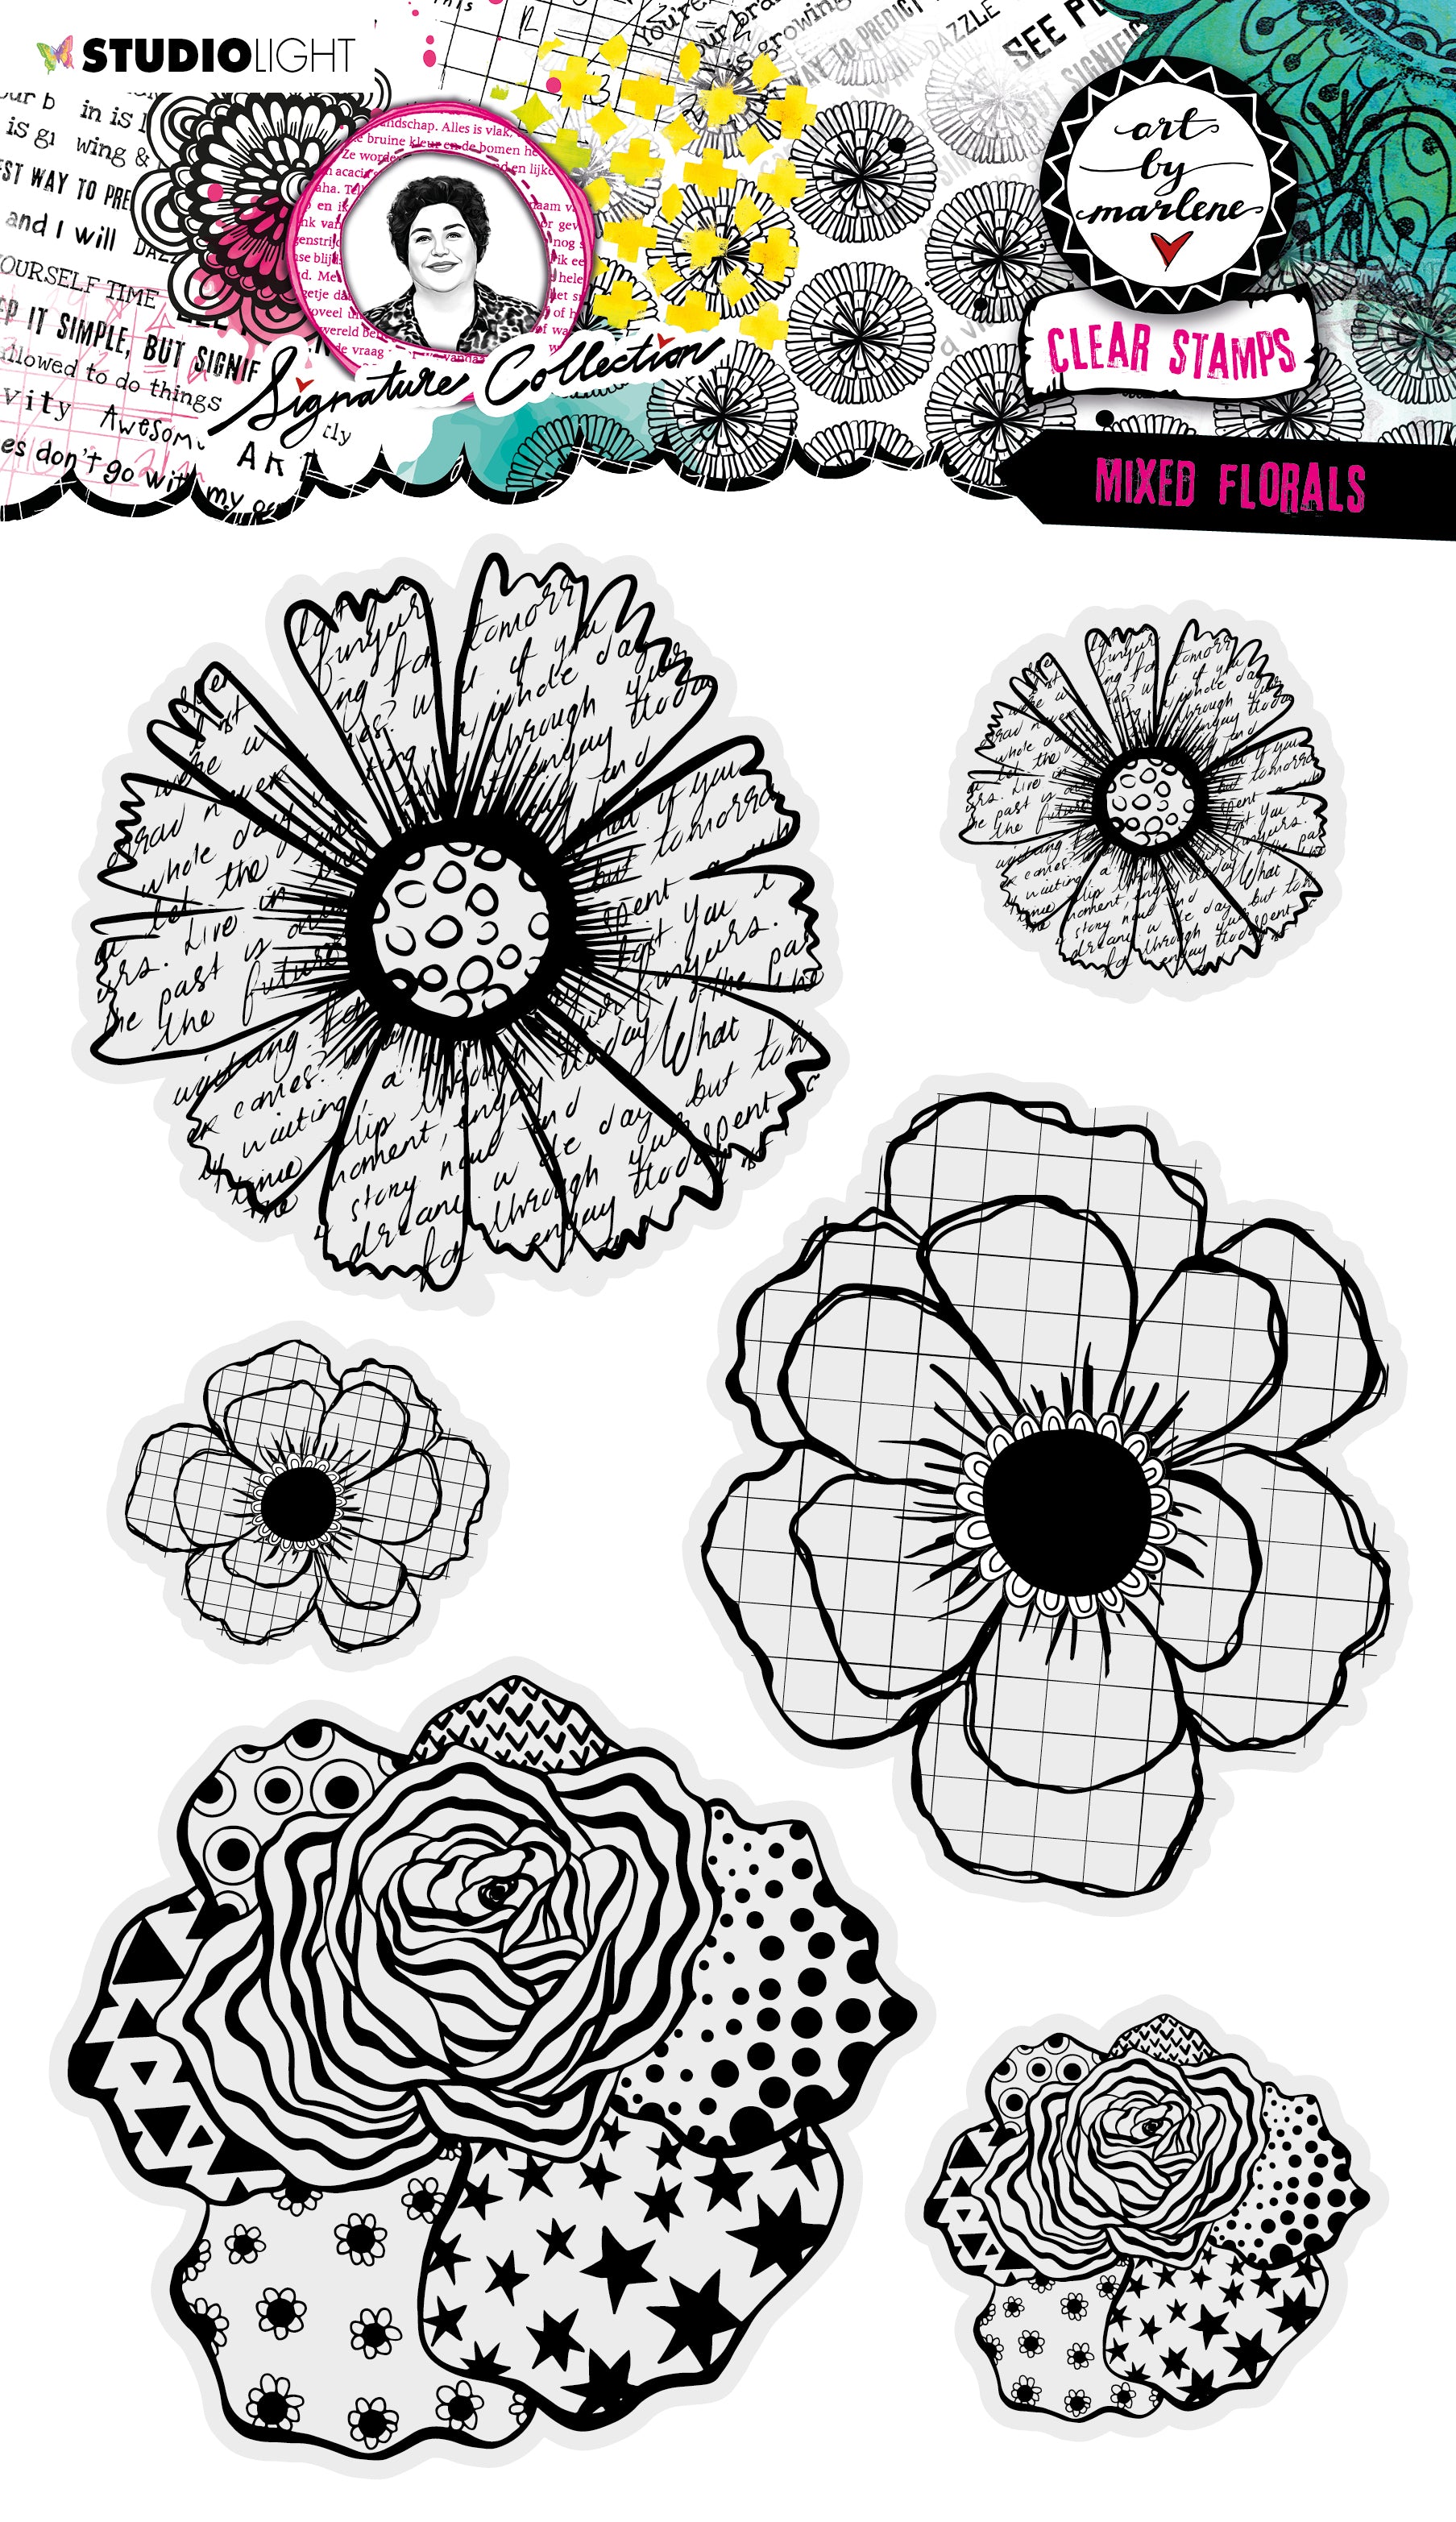 ABM Clear Stamp Mixed Florals Signature Collection 200x139x3mm 6 PC nr.405